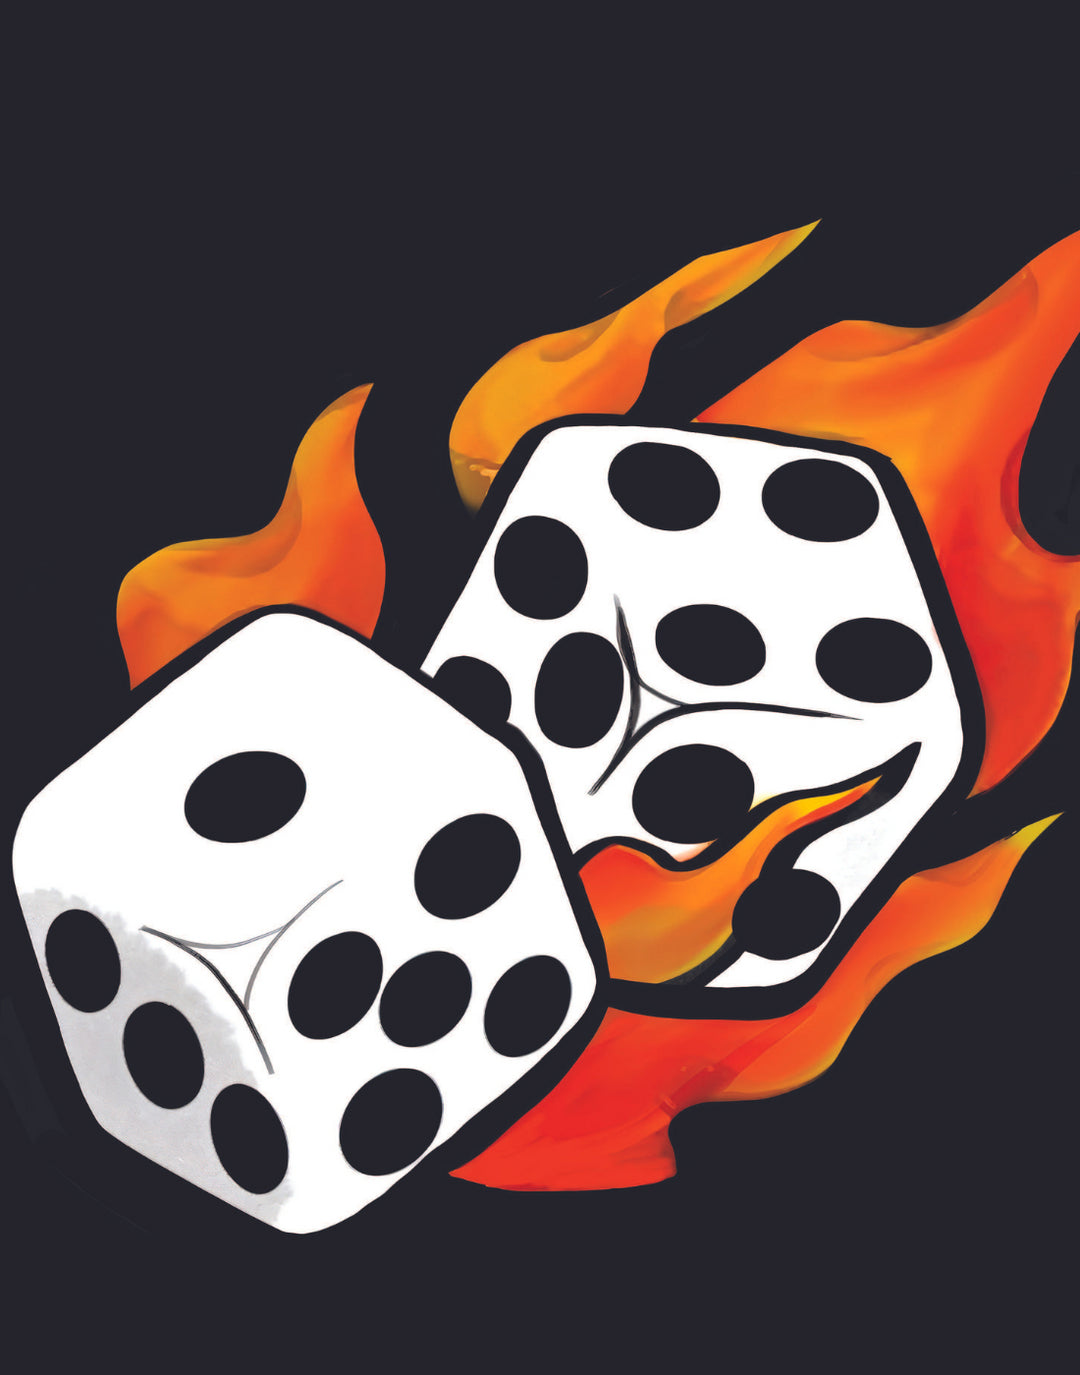 FIRE DICE POSTER - PosterFi